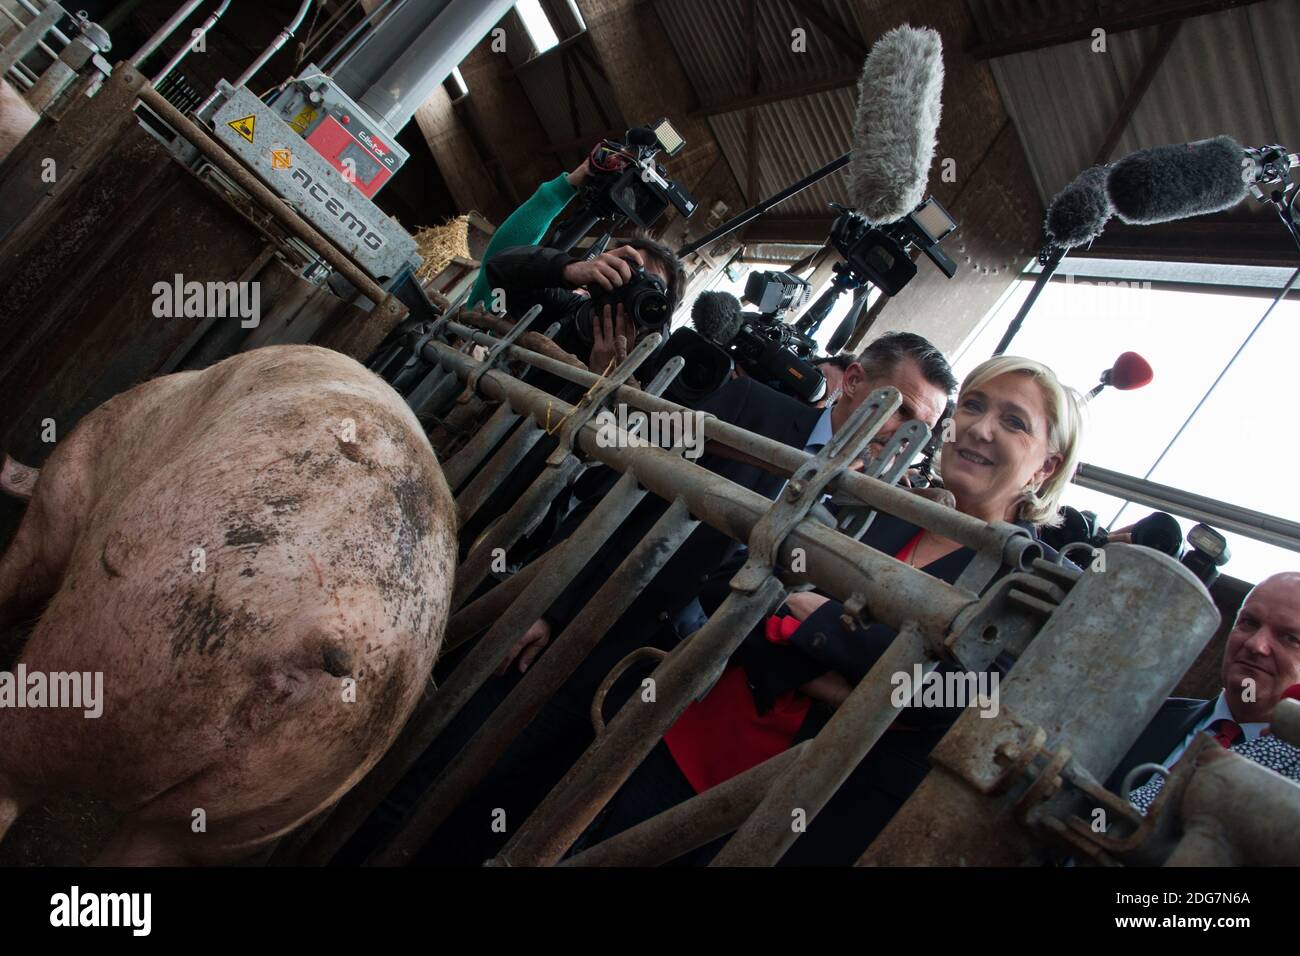 Presidential election candidate for the far-right Front National (FN) party Marine Le Pen visits a pig farm while campaigning, on March 30, 2017 in Pordic, western France. Photo by Vincent Feuray/ABACAPRESS.COM Stock Photo